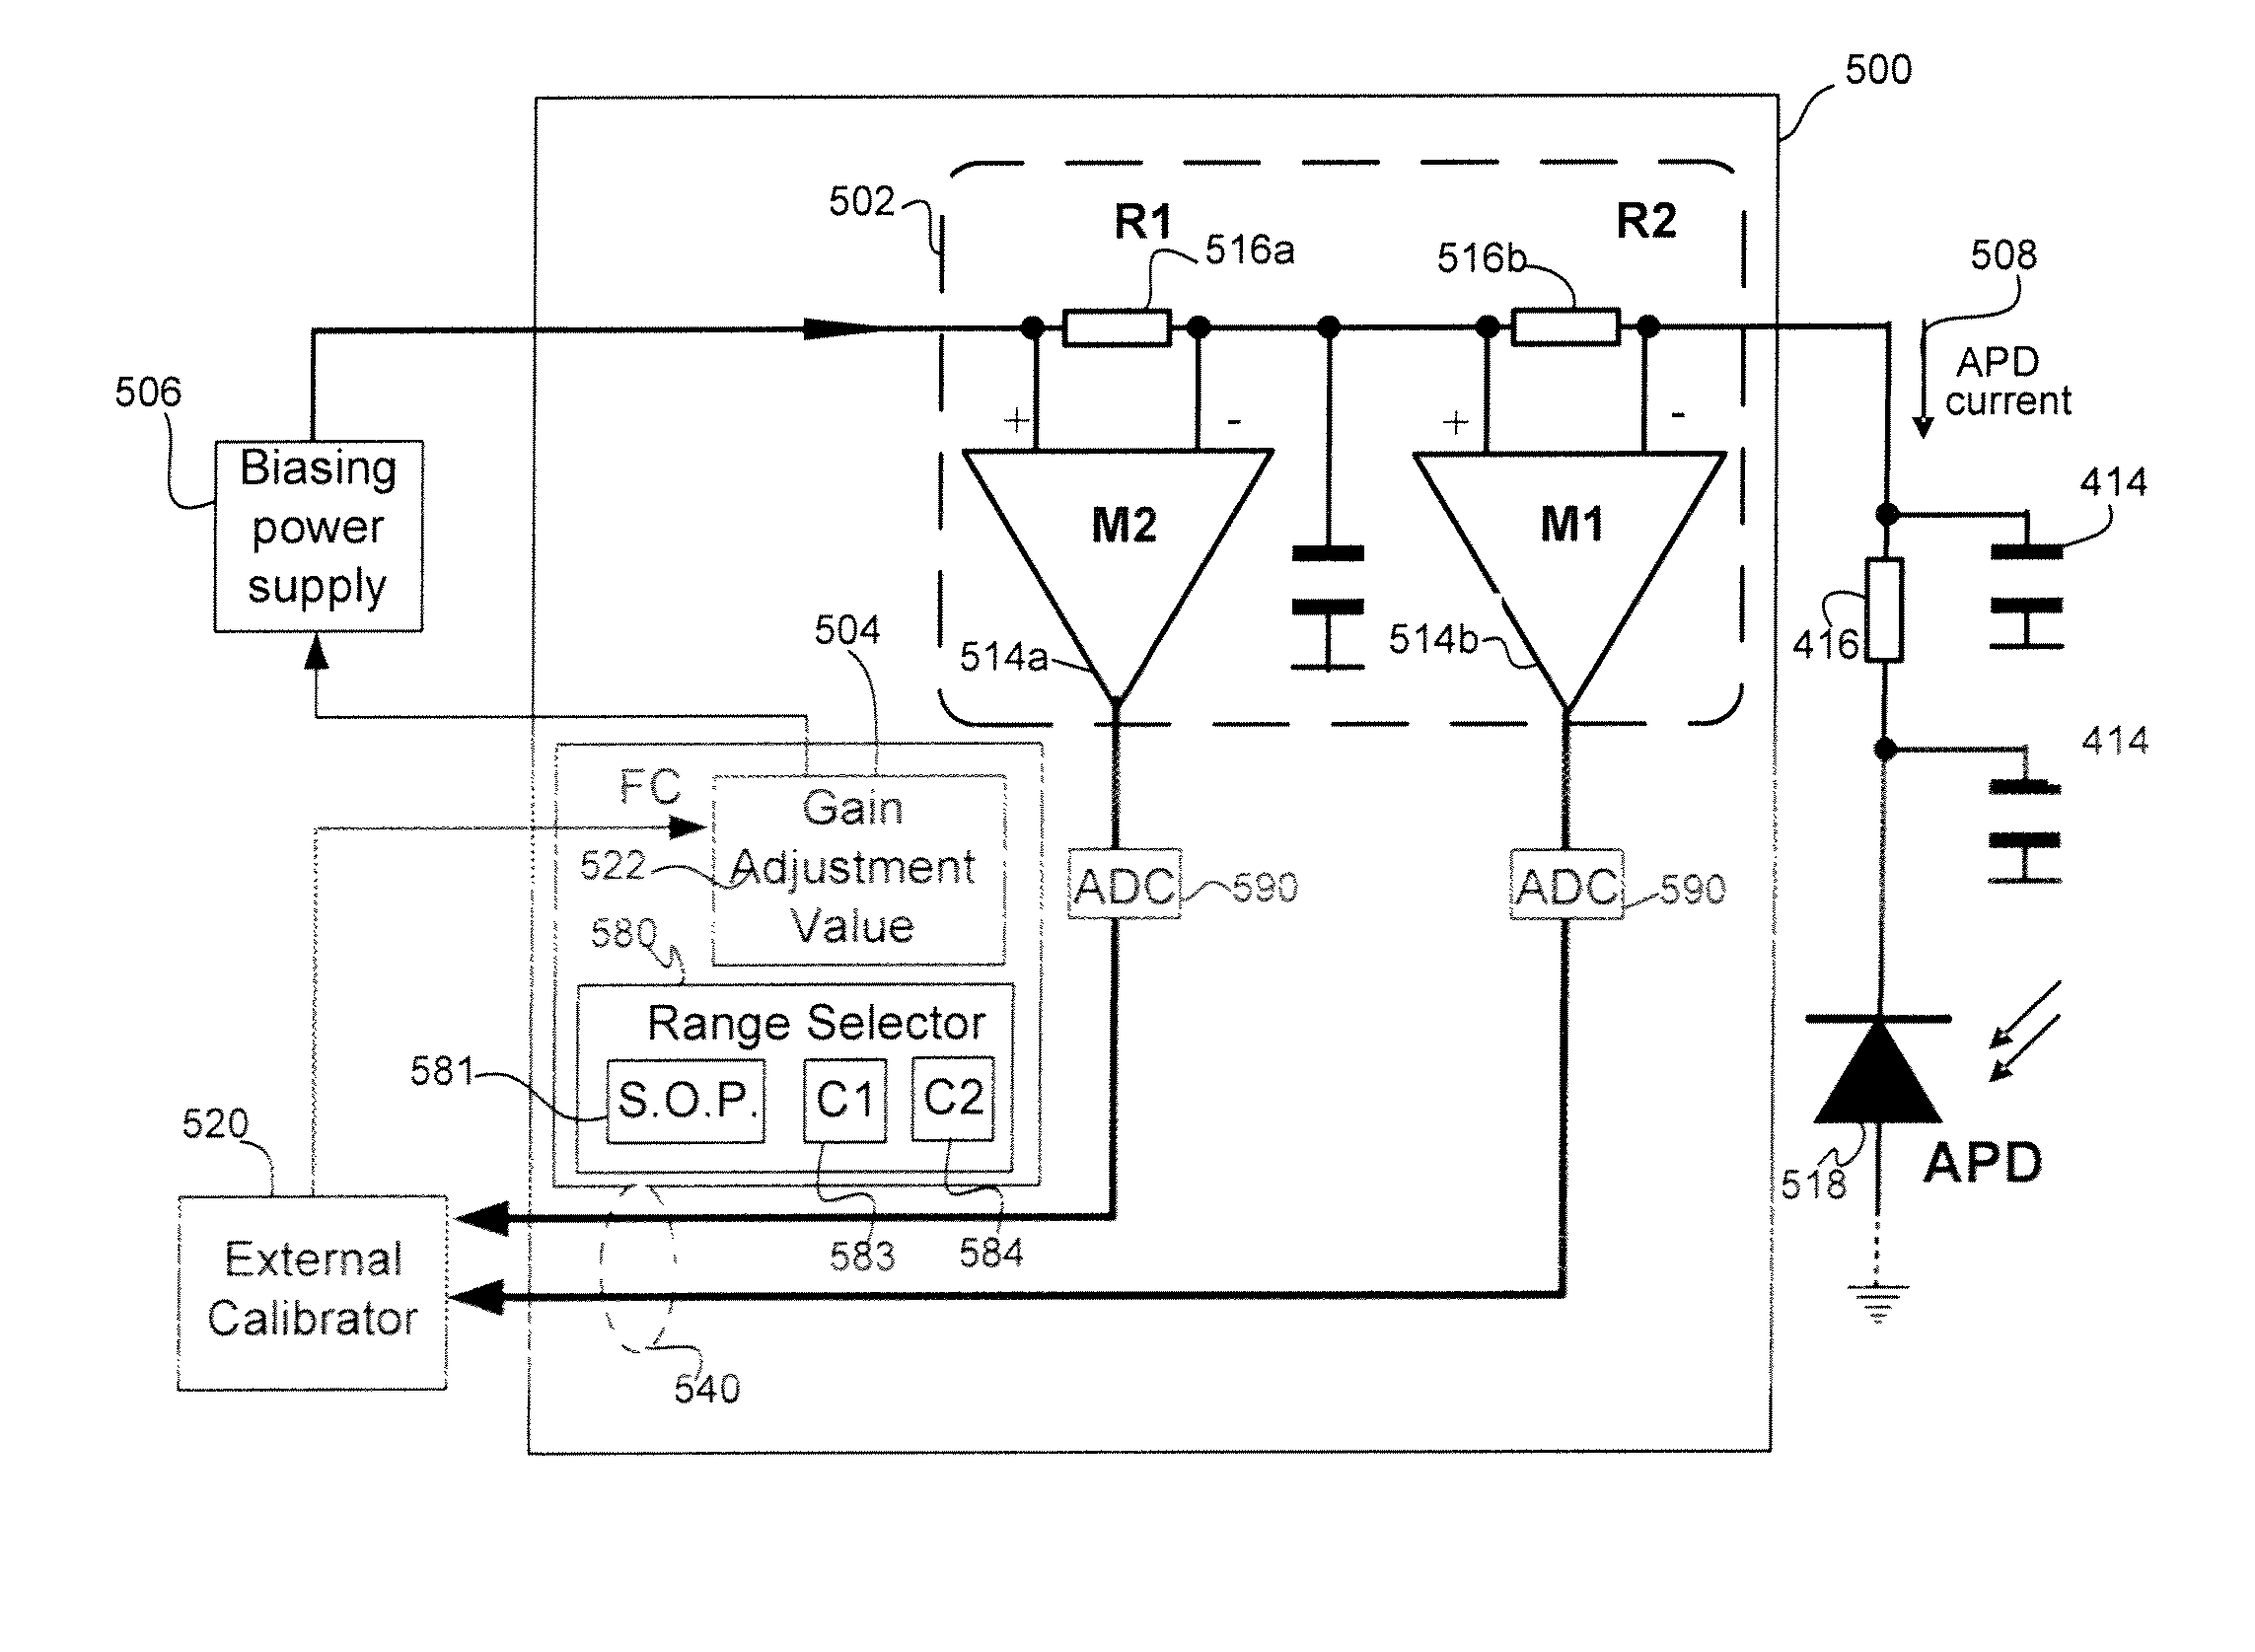 In-situ power monitor providing an extended range for monitoring input optical power incident on avalanche photodiodes